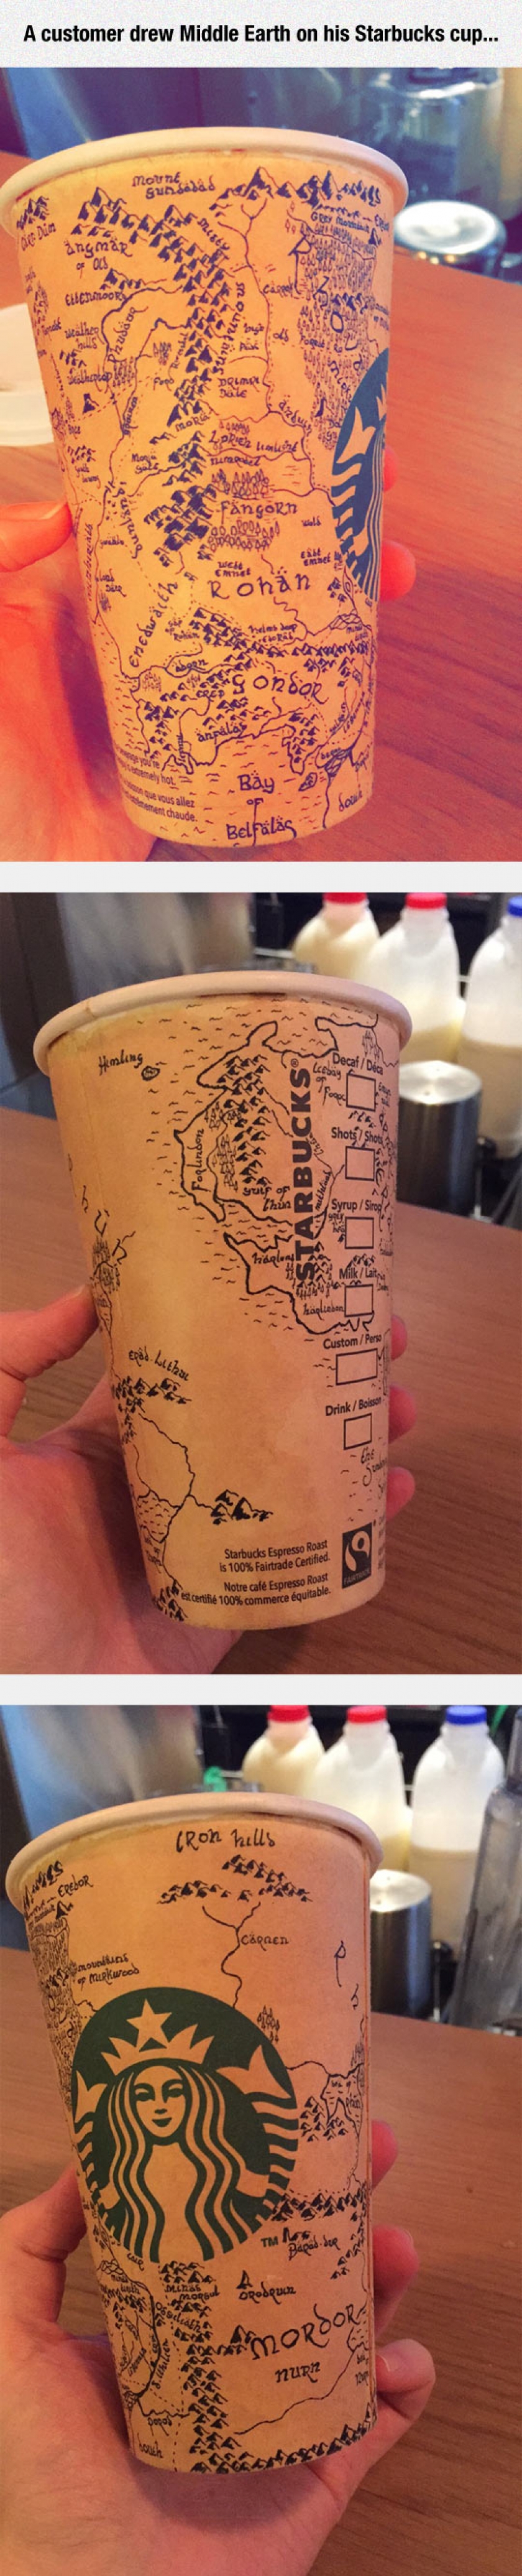 Drawing On Starbuck’s Cups